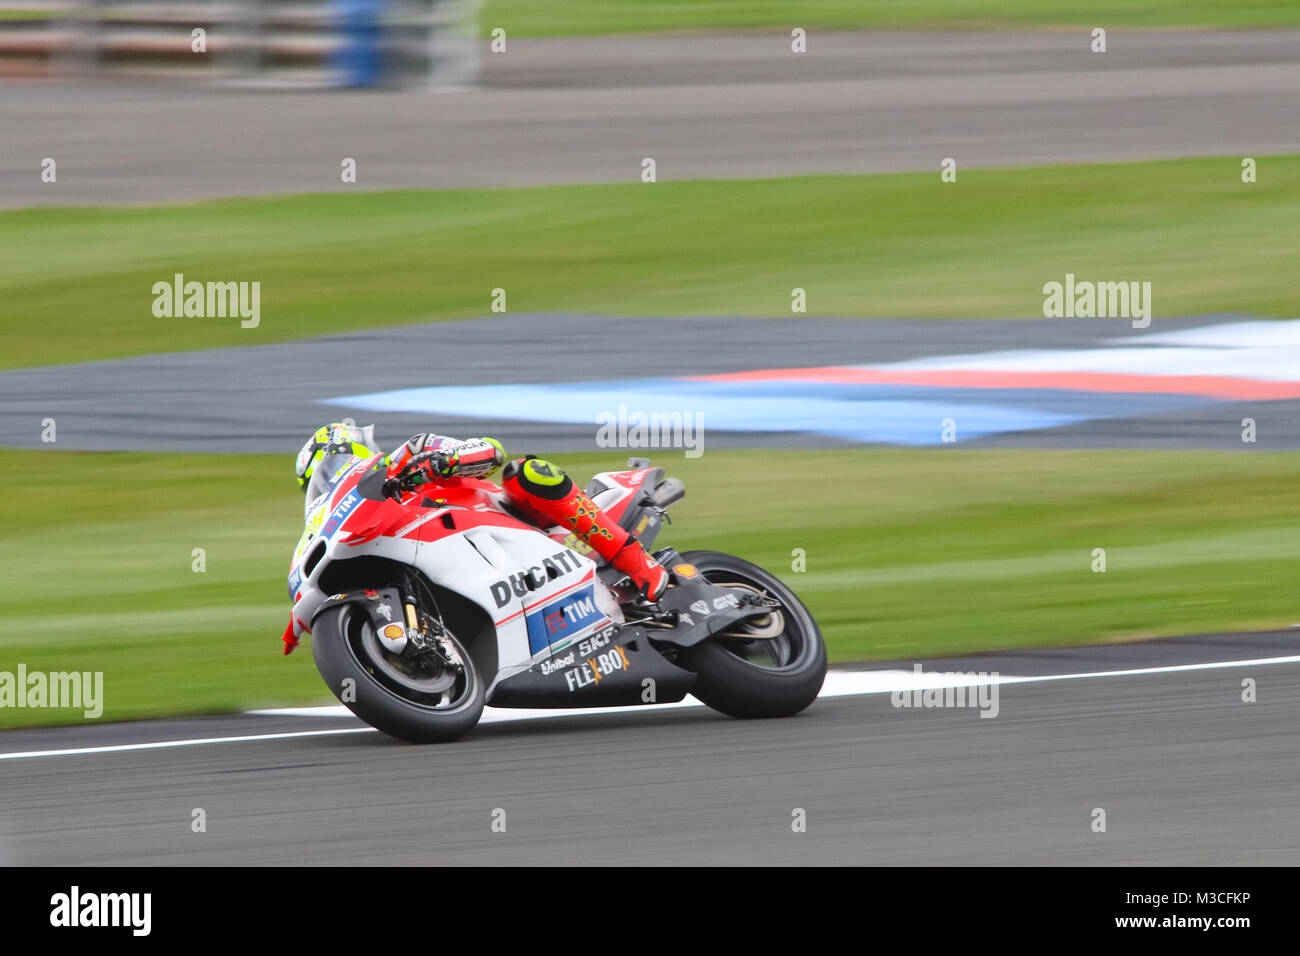 Andrea Iannone exiting Beckets corner and winding up for the Hanger straight during Friday Free Practice at the MotoGP British Grand Prix 2016 Stock Photo